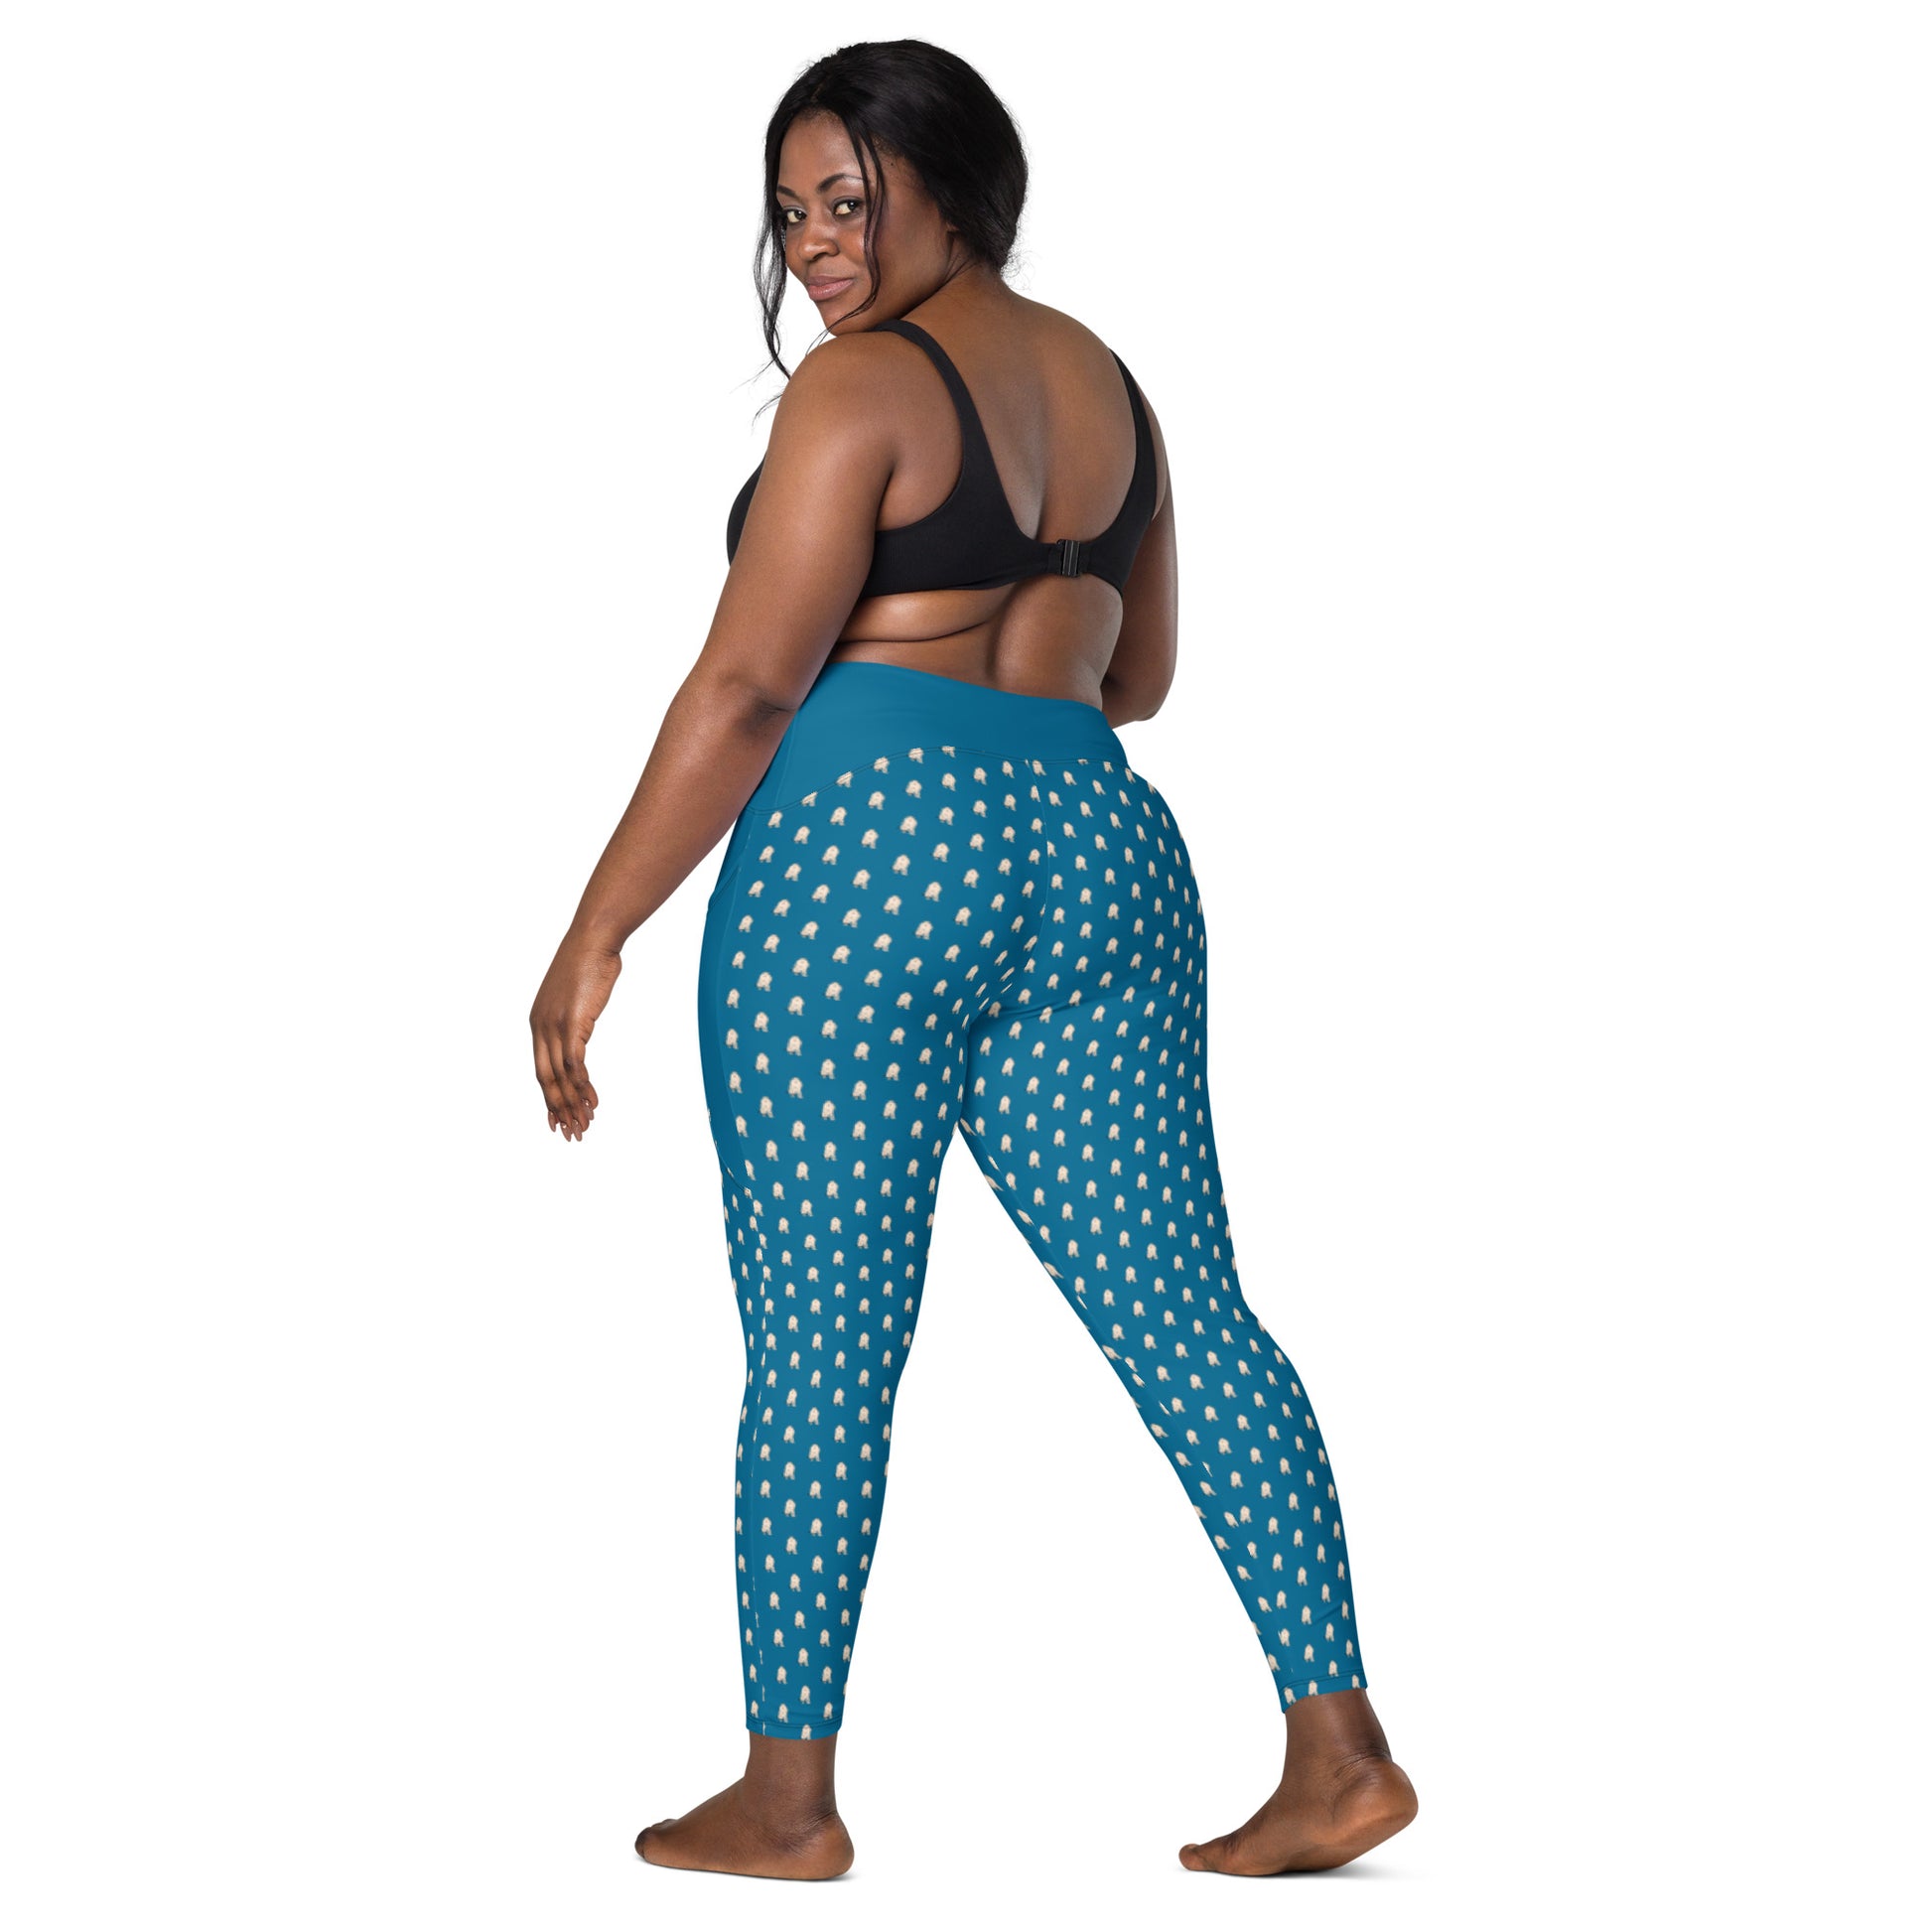 Pug Butt athletic leggings with pockets – Pug Life